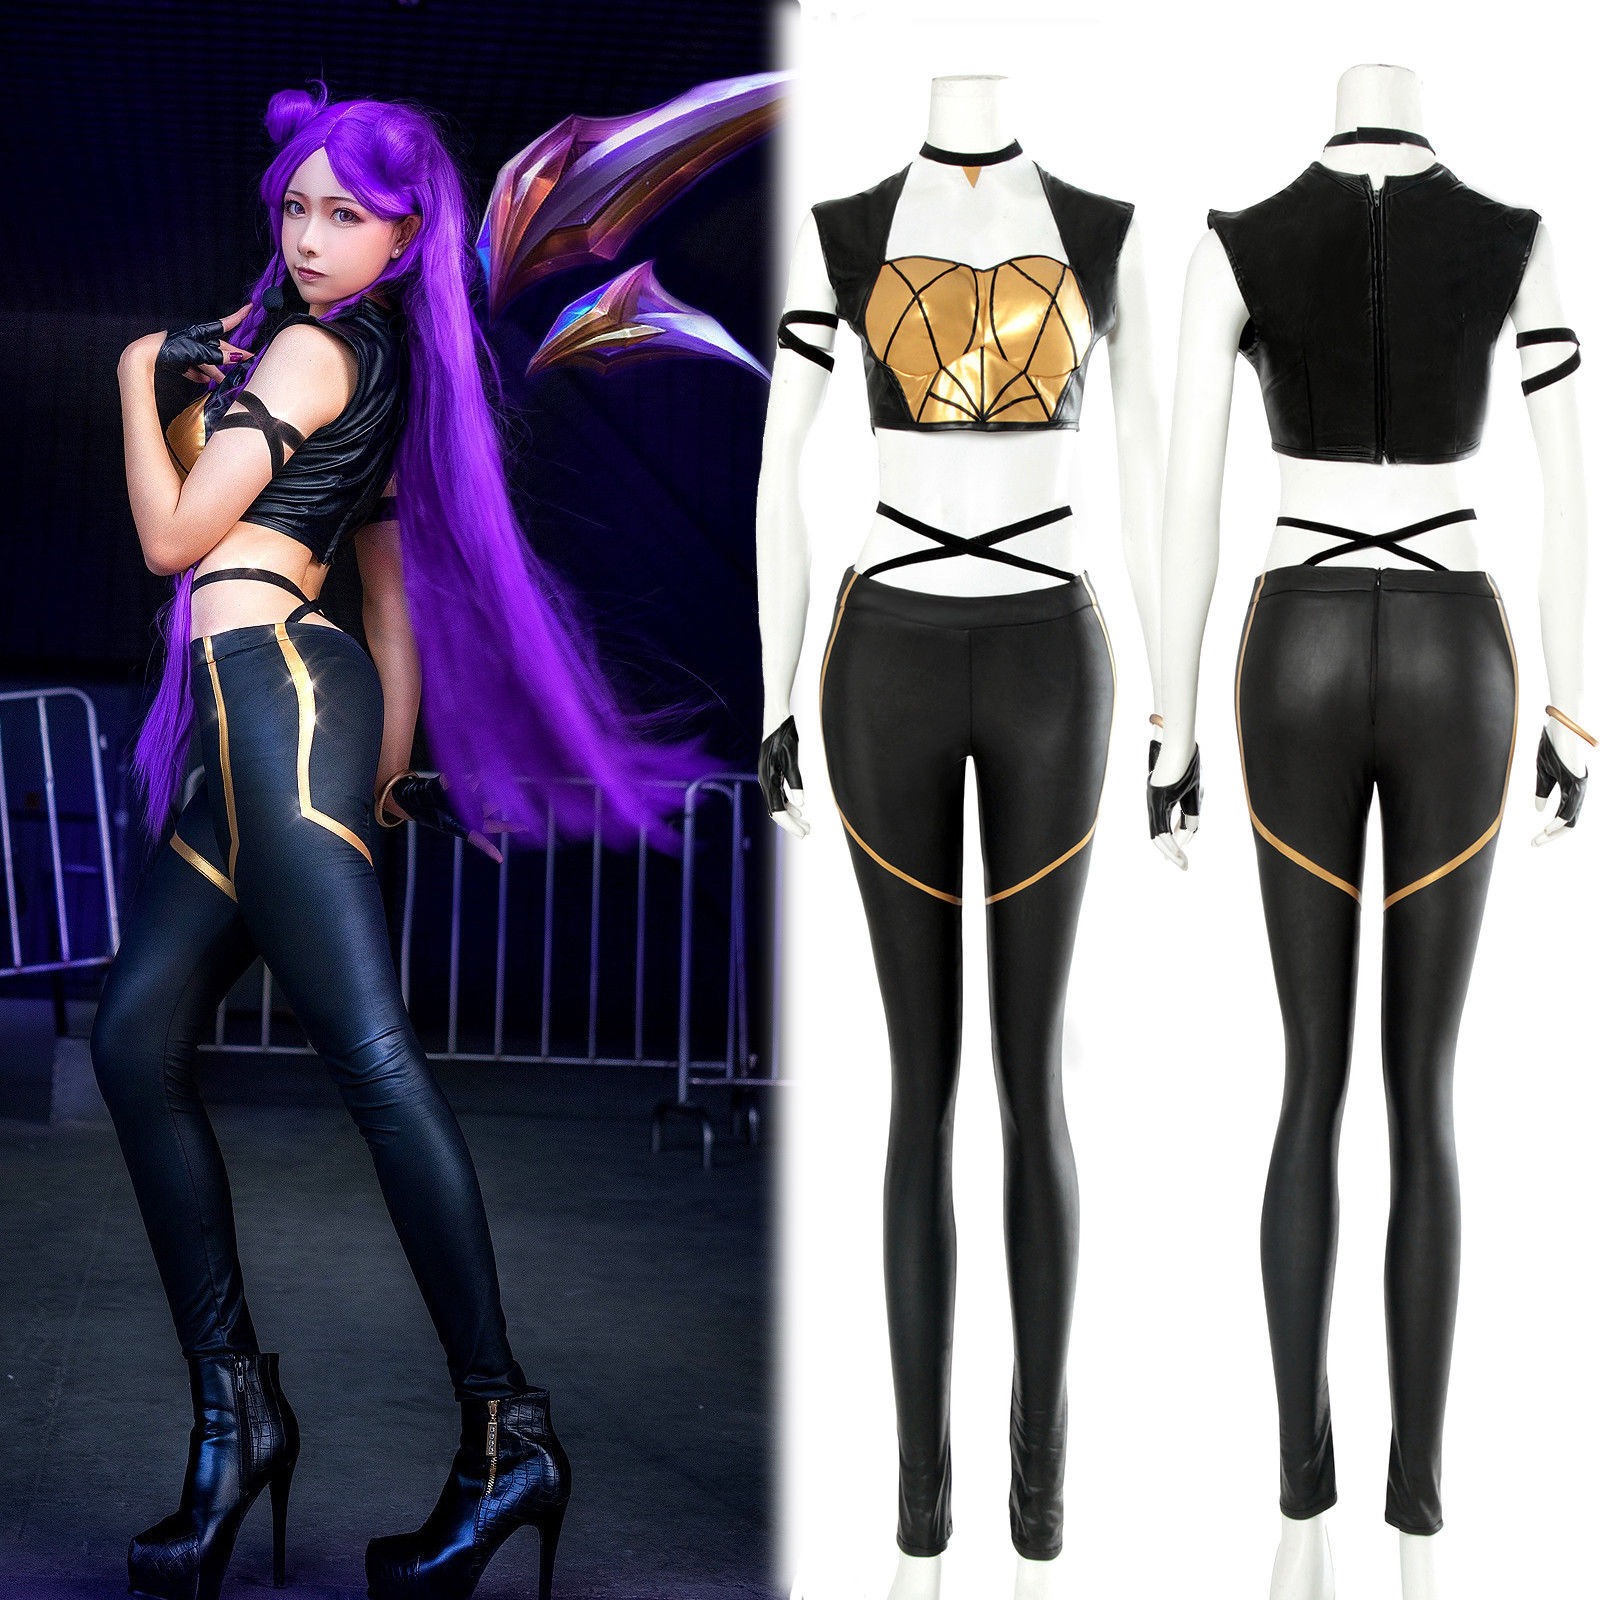 Unbranded - Lol league of legends kda kaisa leather punk uniform cosplay costume full suit